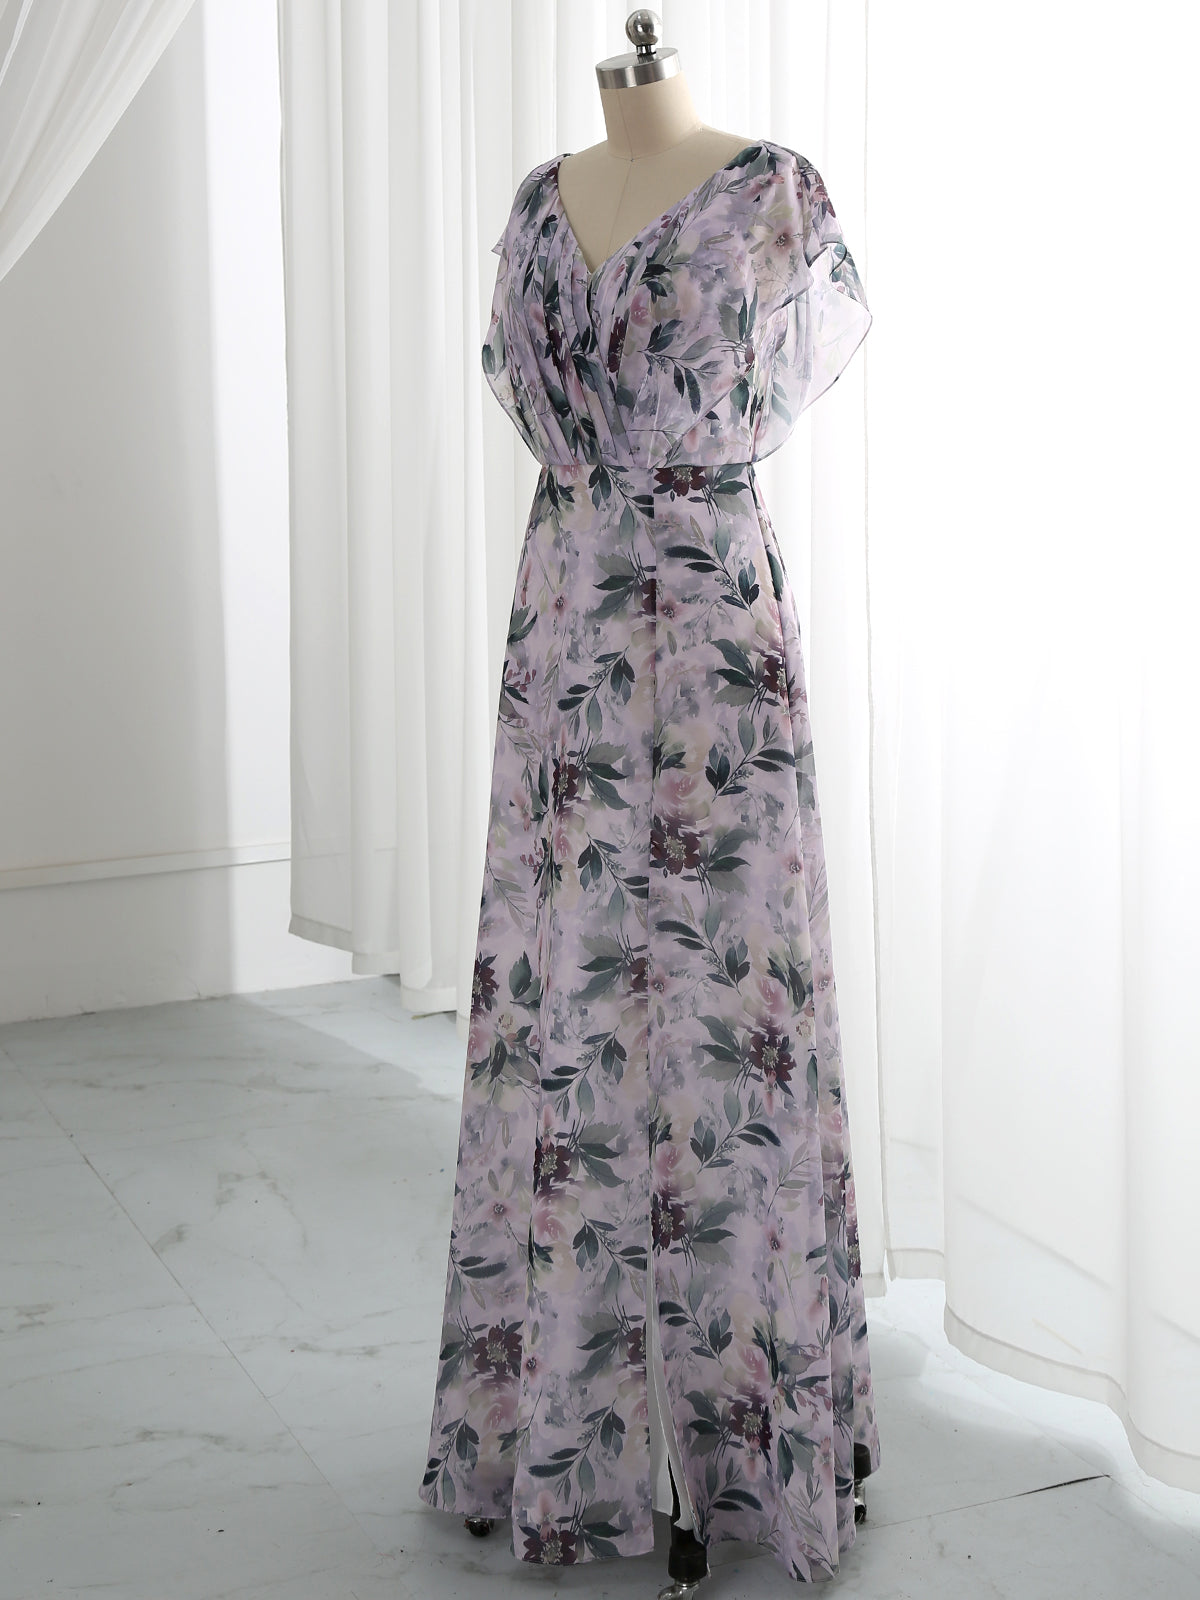 Bat Sleeves V Neck Floral Chiffon Wisteria Prom Dress Wedding Guest Evening Gown